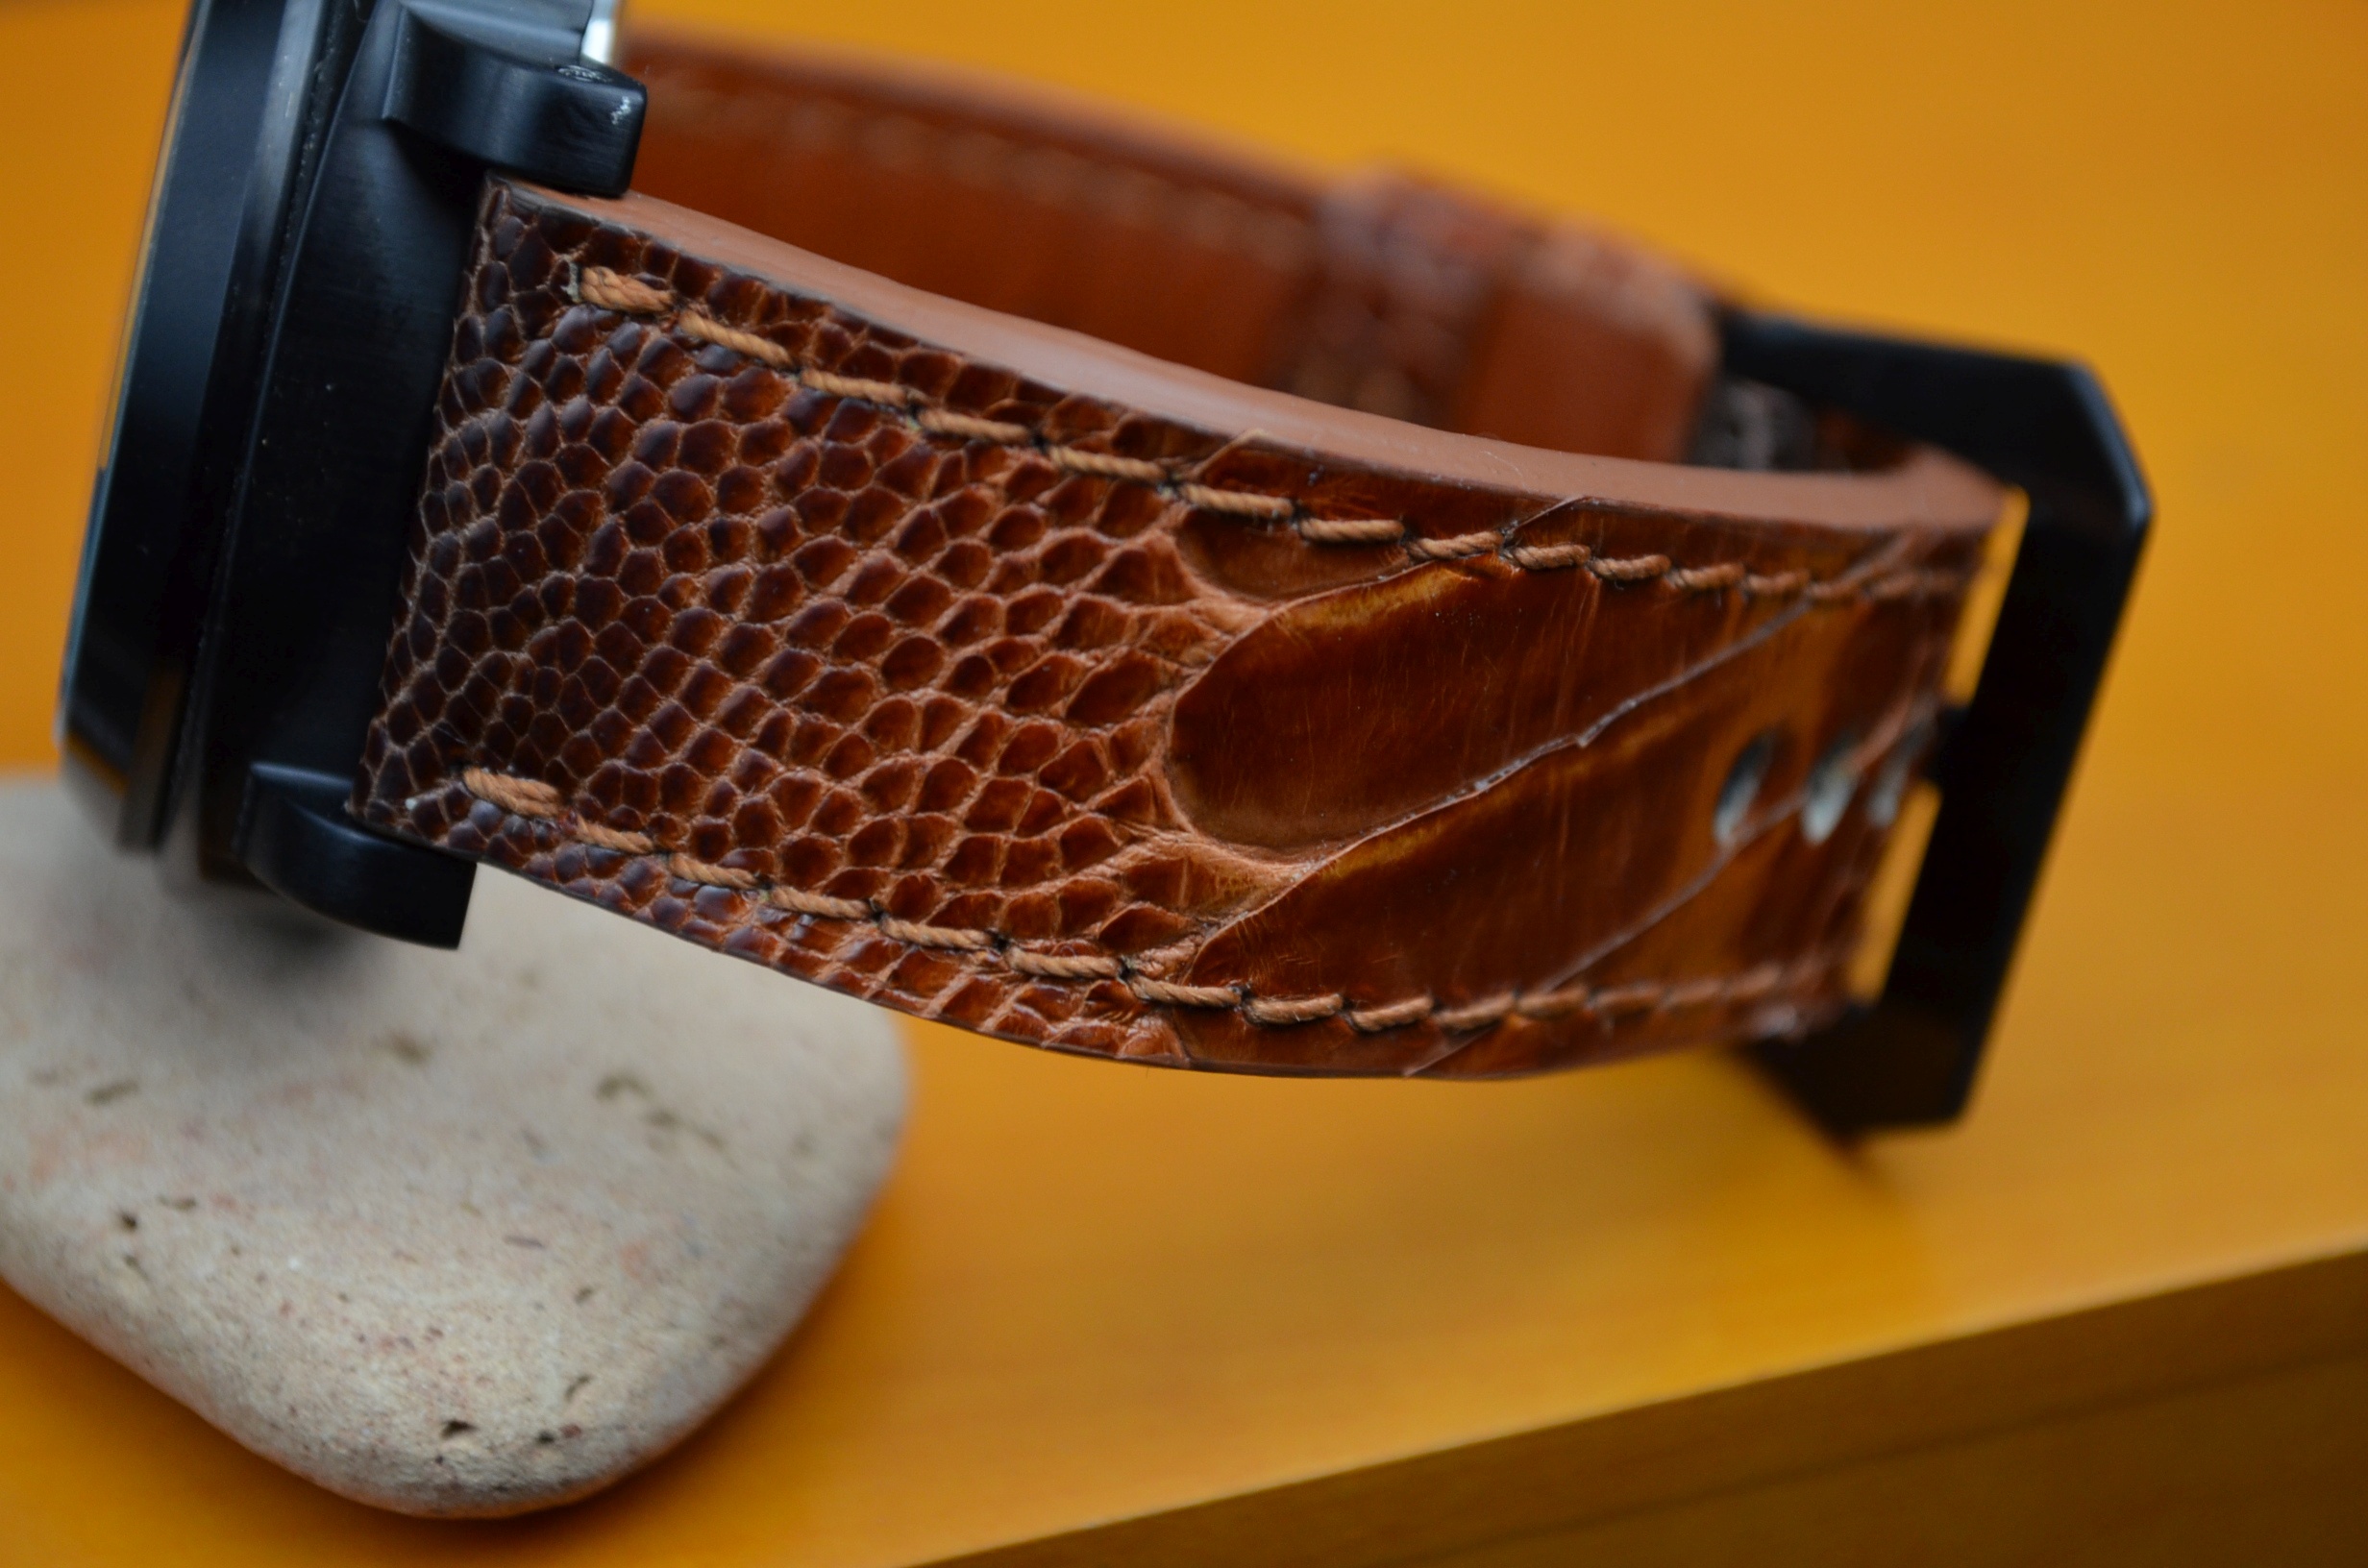 HONEY SHINY is one of our hand crafted watch straps. Available in honey color, 4 - 4.5 mm thick.